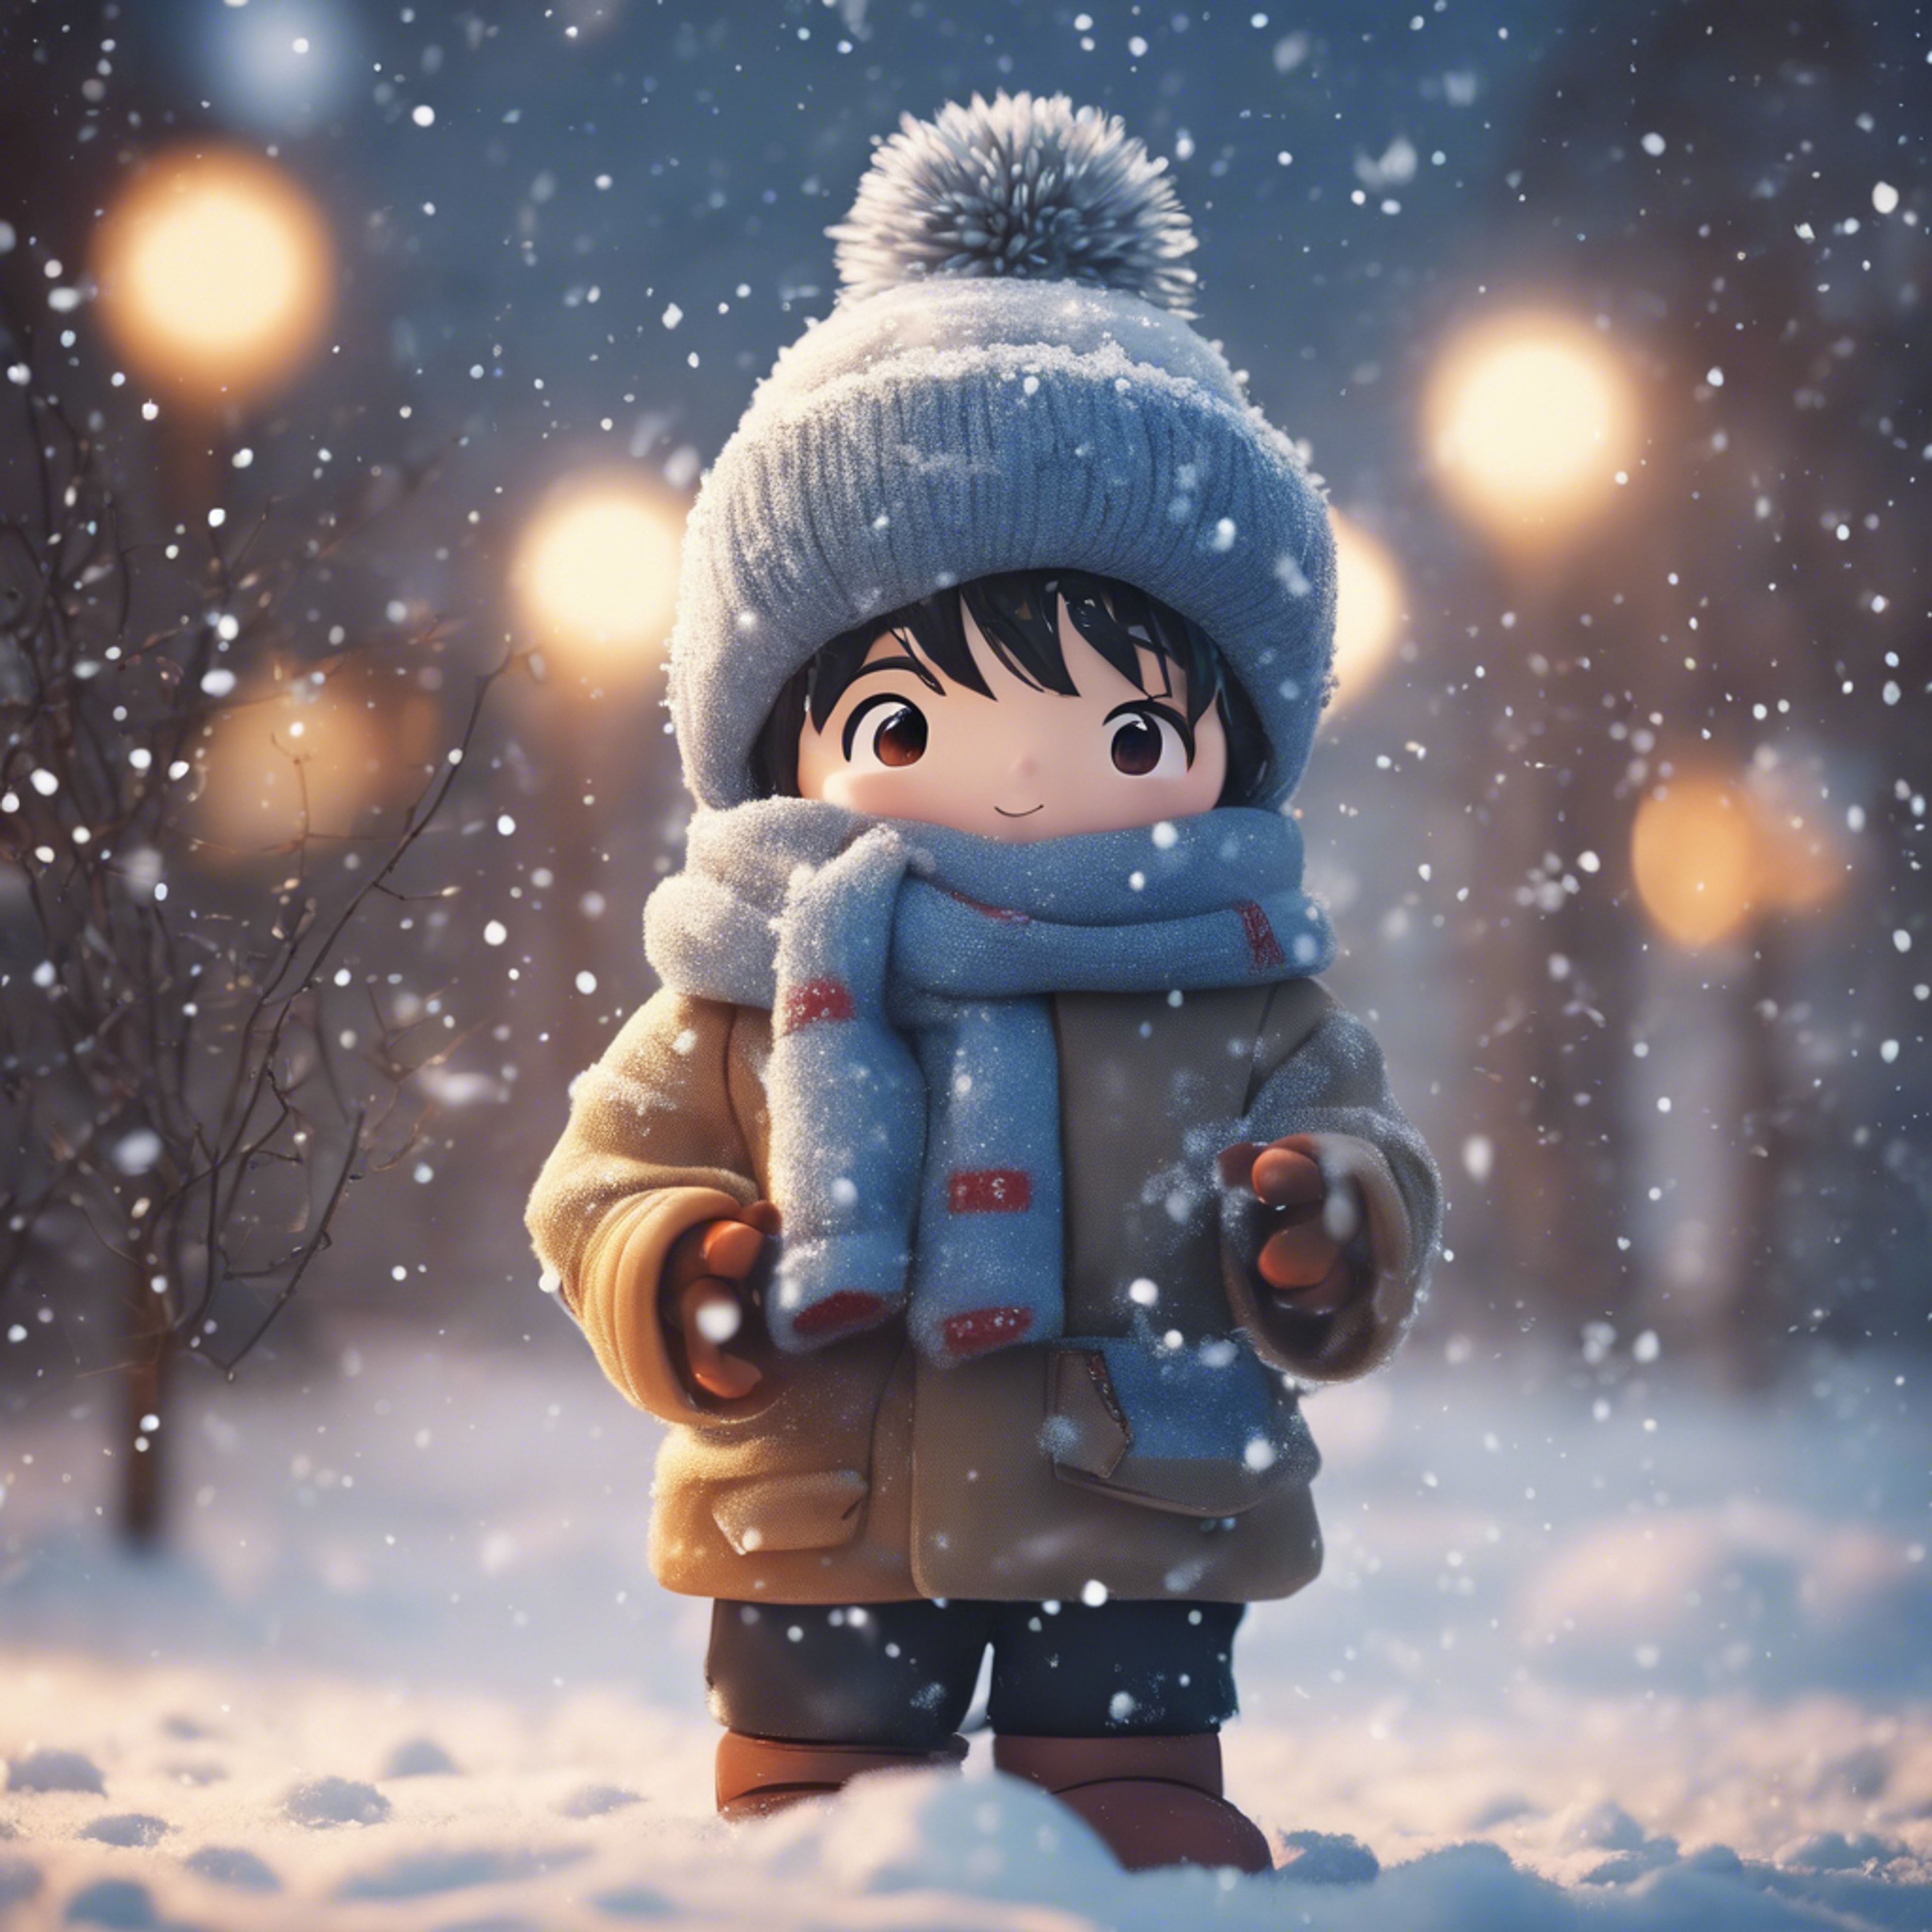 Anime boy wrapped in warm winter clothes, building a playful snowman in the snowfall. วอลล์เปเปอร์[d4075dc9b13644f685e7]